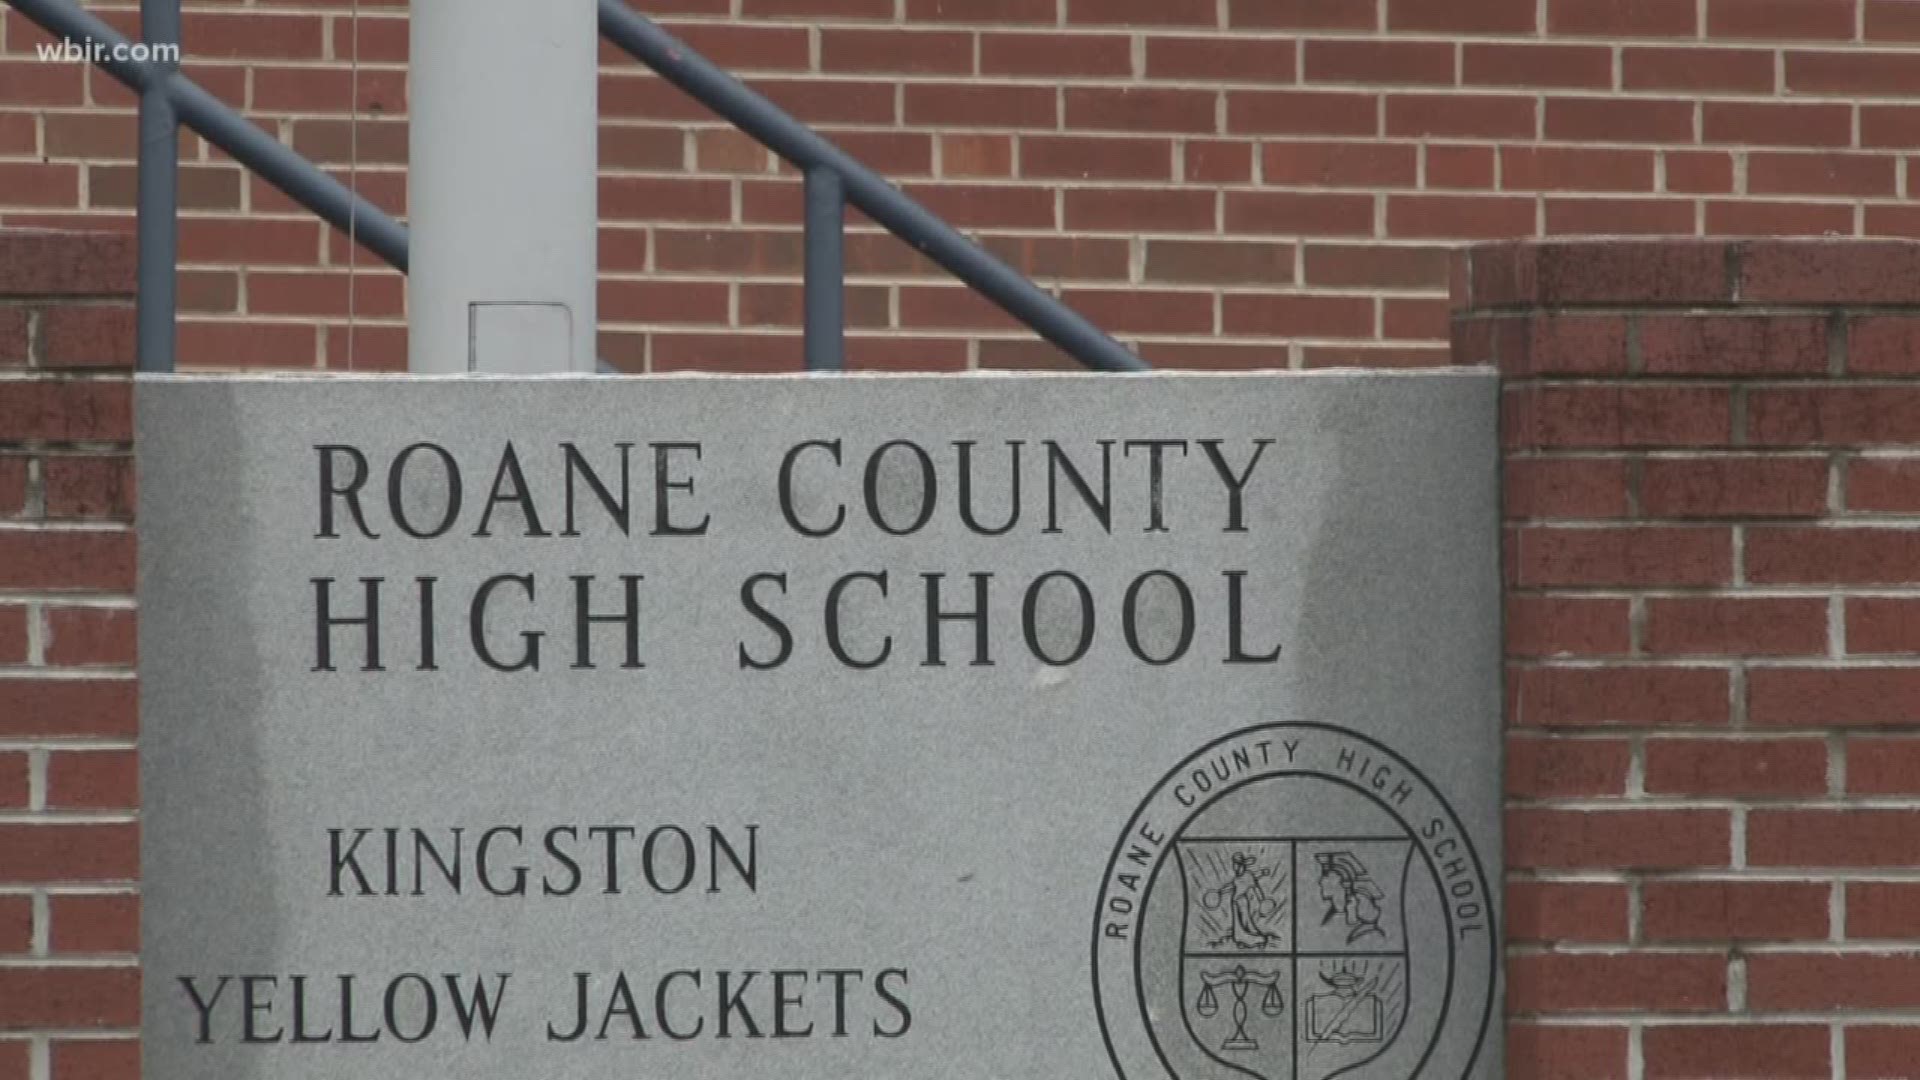 The Roane County School Board voted Monday night to reduce the cost of the building program for a new high school in Roane County by $1.25 million.